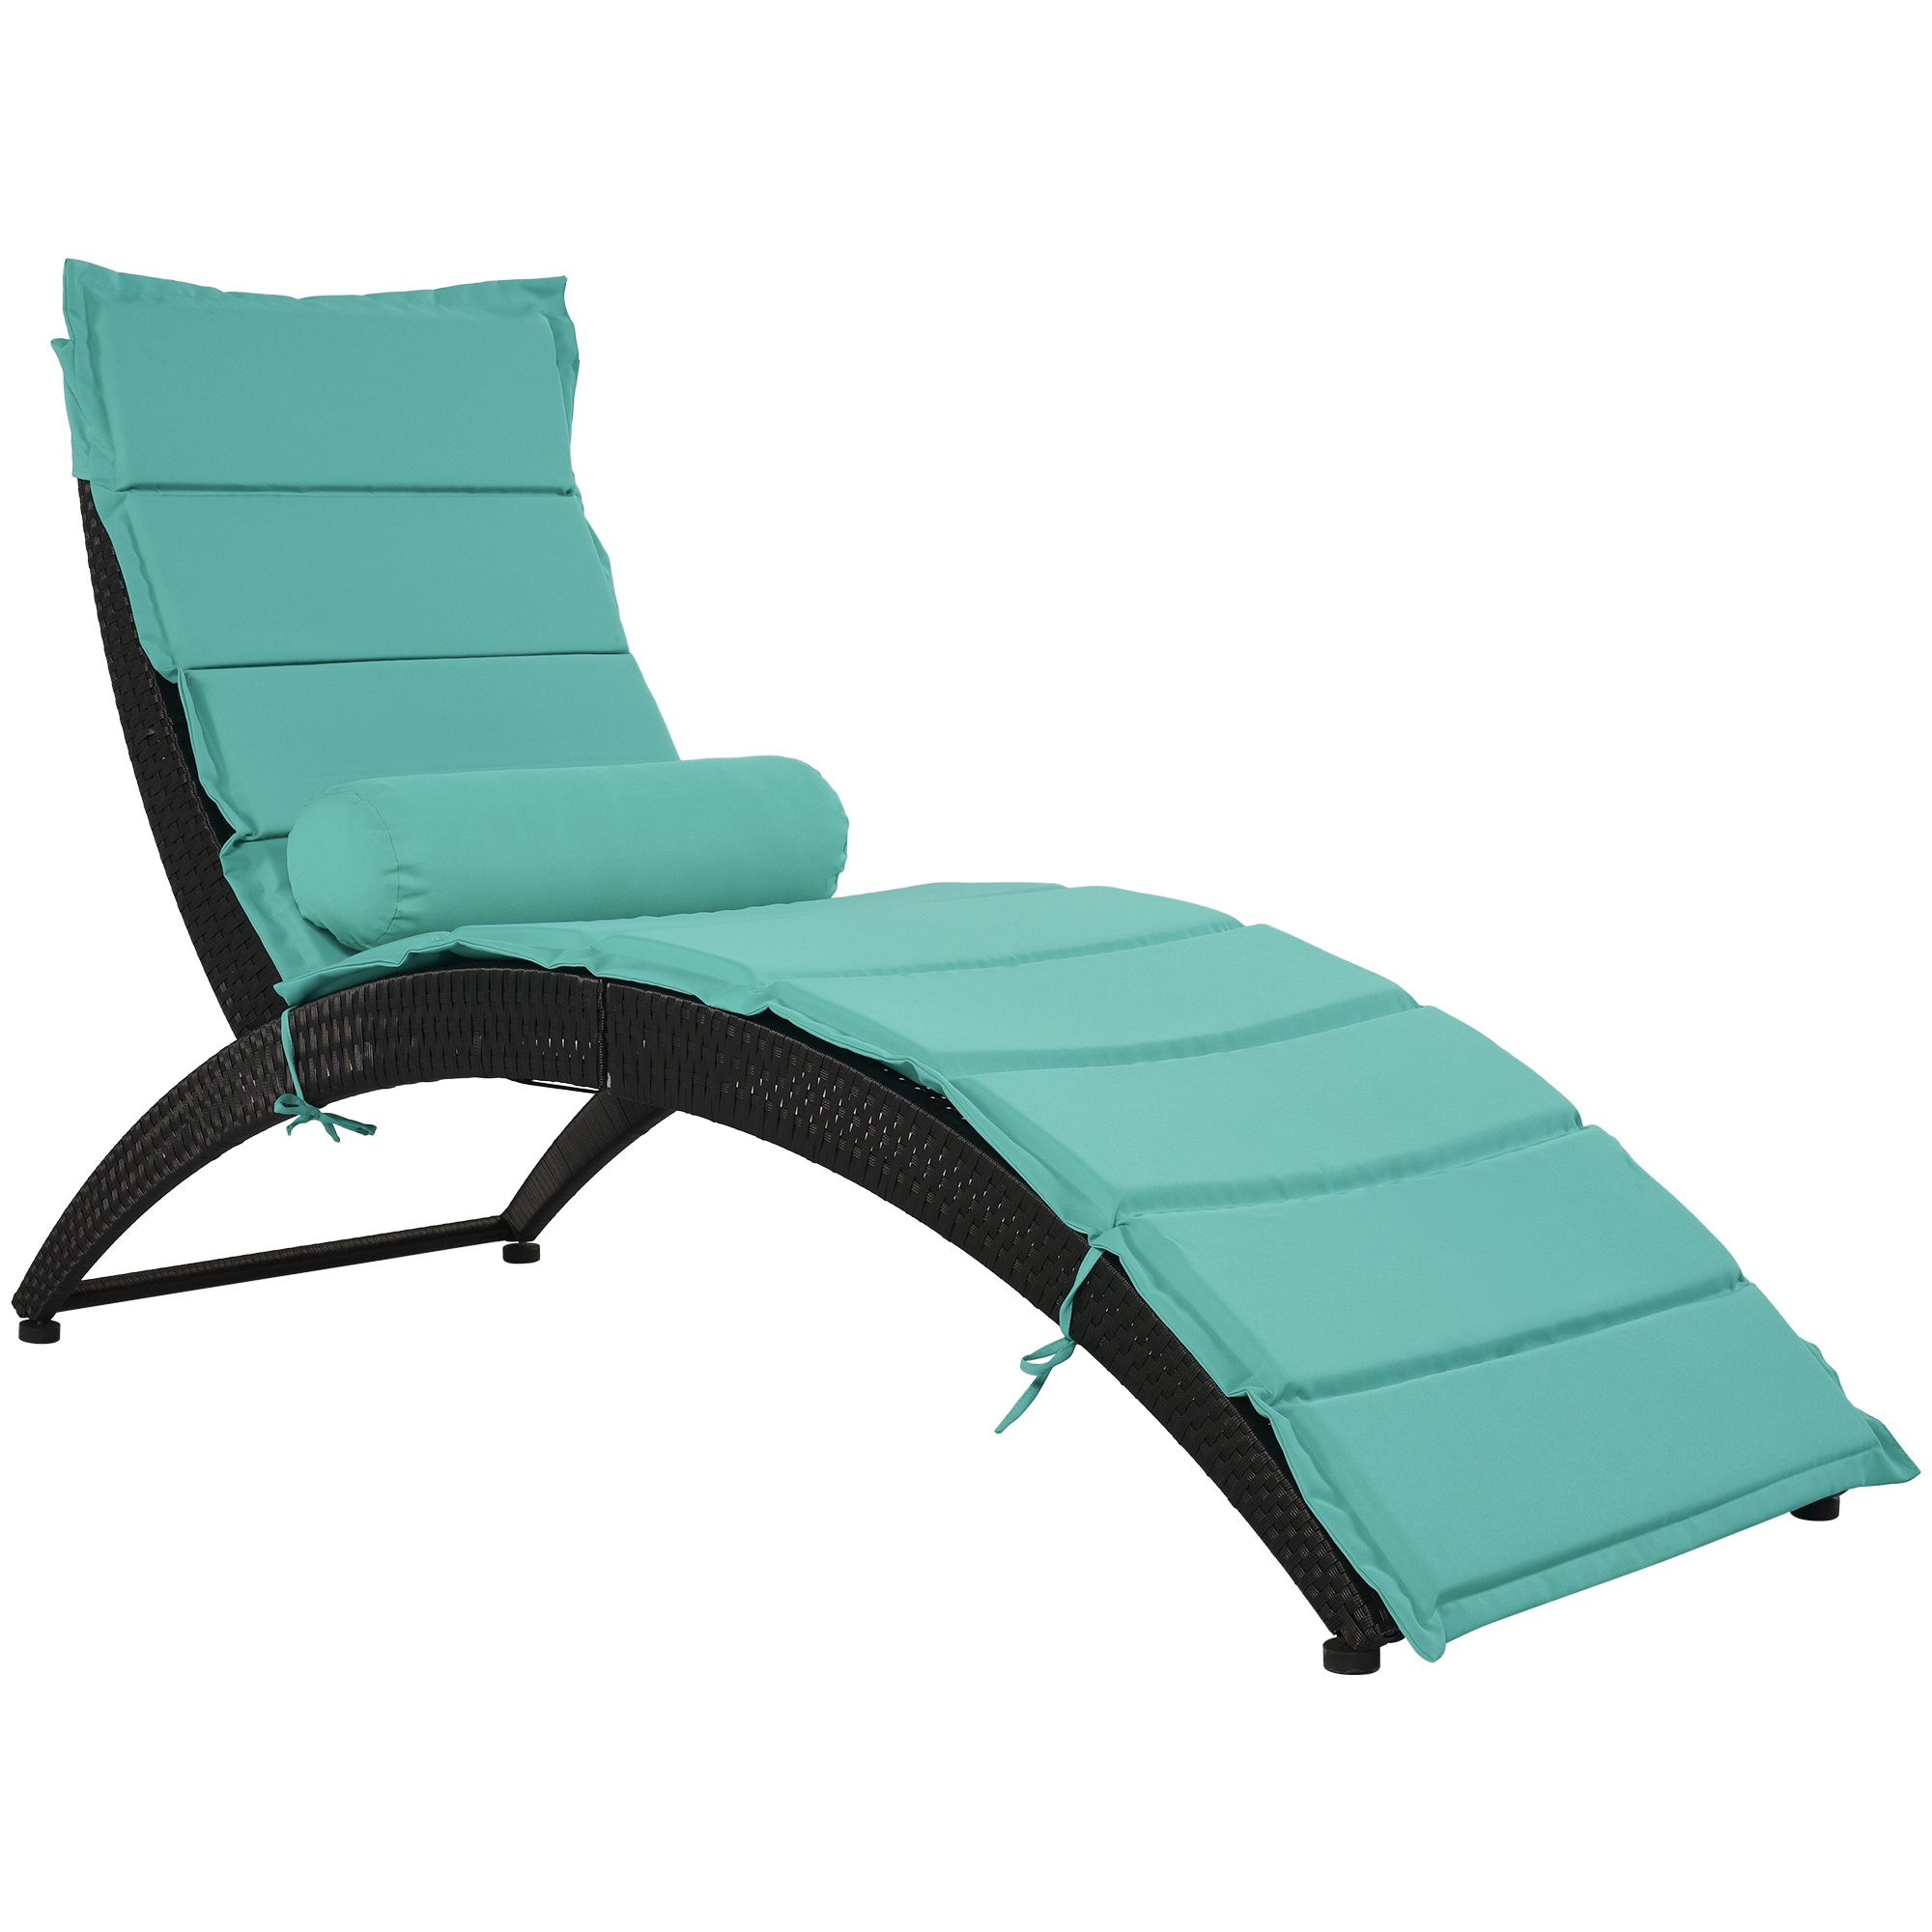 Patio Chaise Lounge, Reclining Camping Chair, PE Rattan Sun Recliner Chair with Seat Cushion, Poolside Garden Outdoor Chaise Lounge Chairs, JA1099 - image 4 of 8